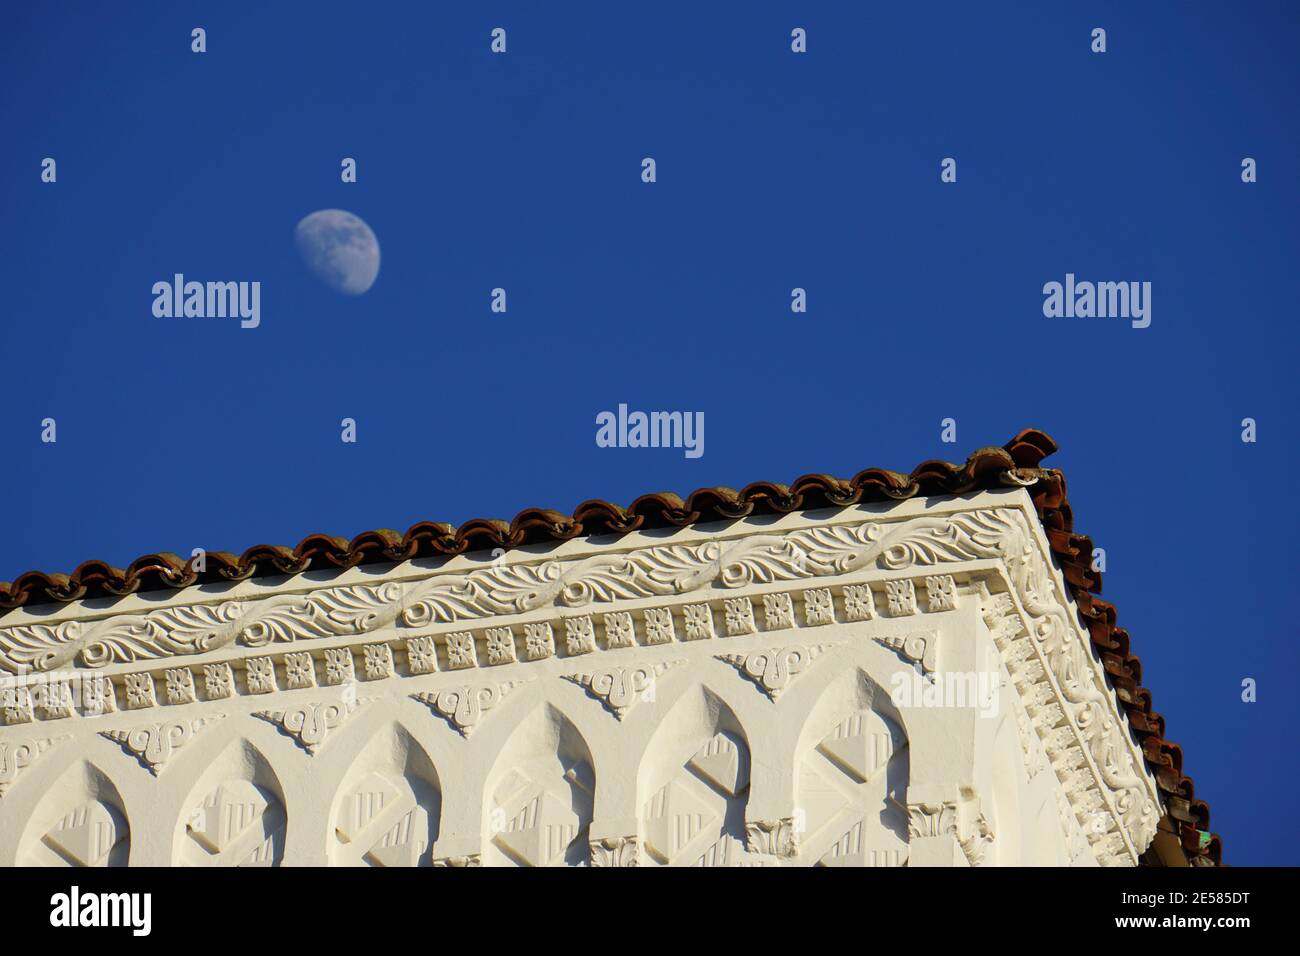 Day moon, white moon, half moon, against a blue sky, hanging above a shingled rooftop. Oakland, California Stock Photo